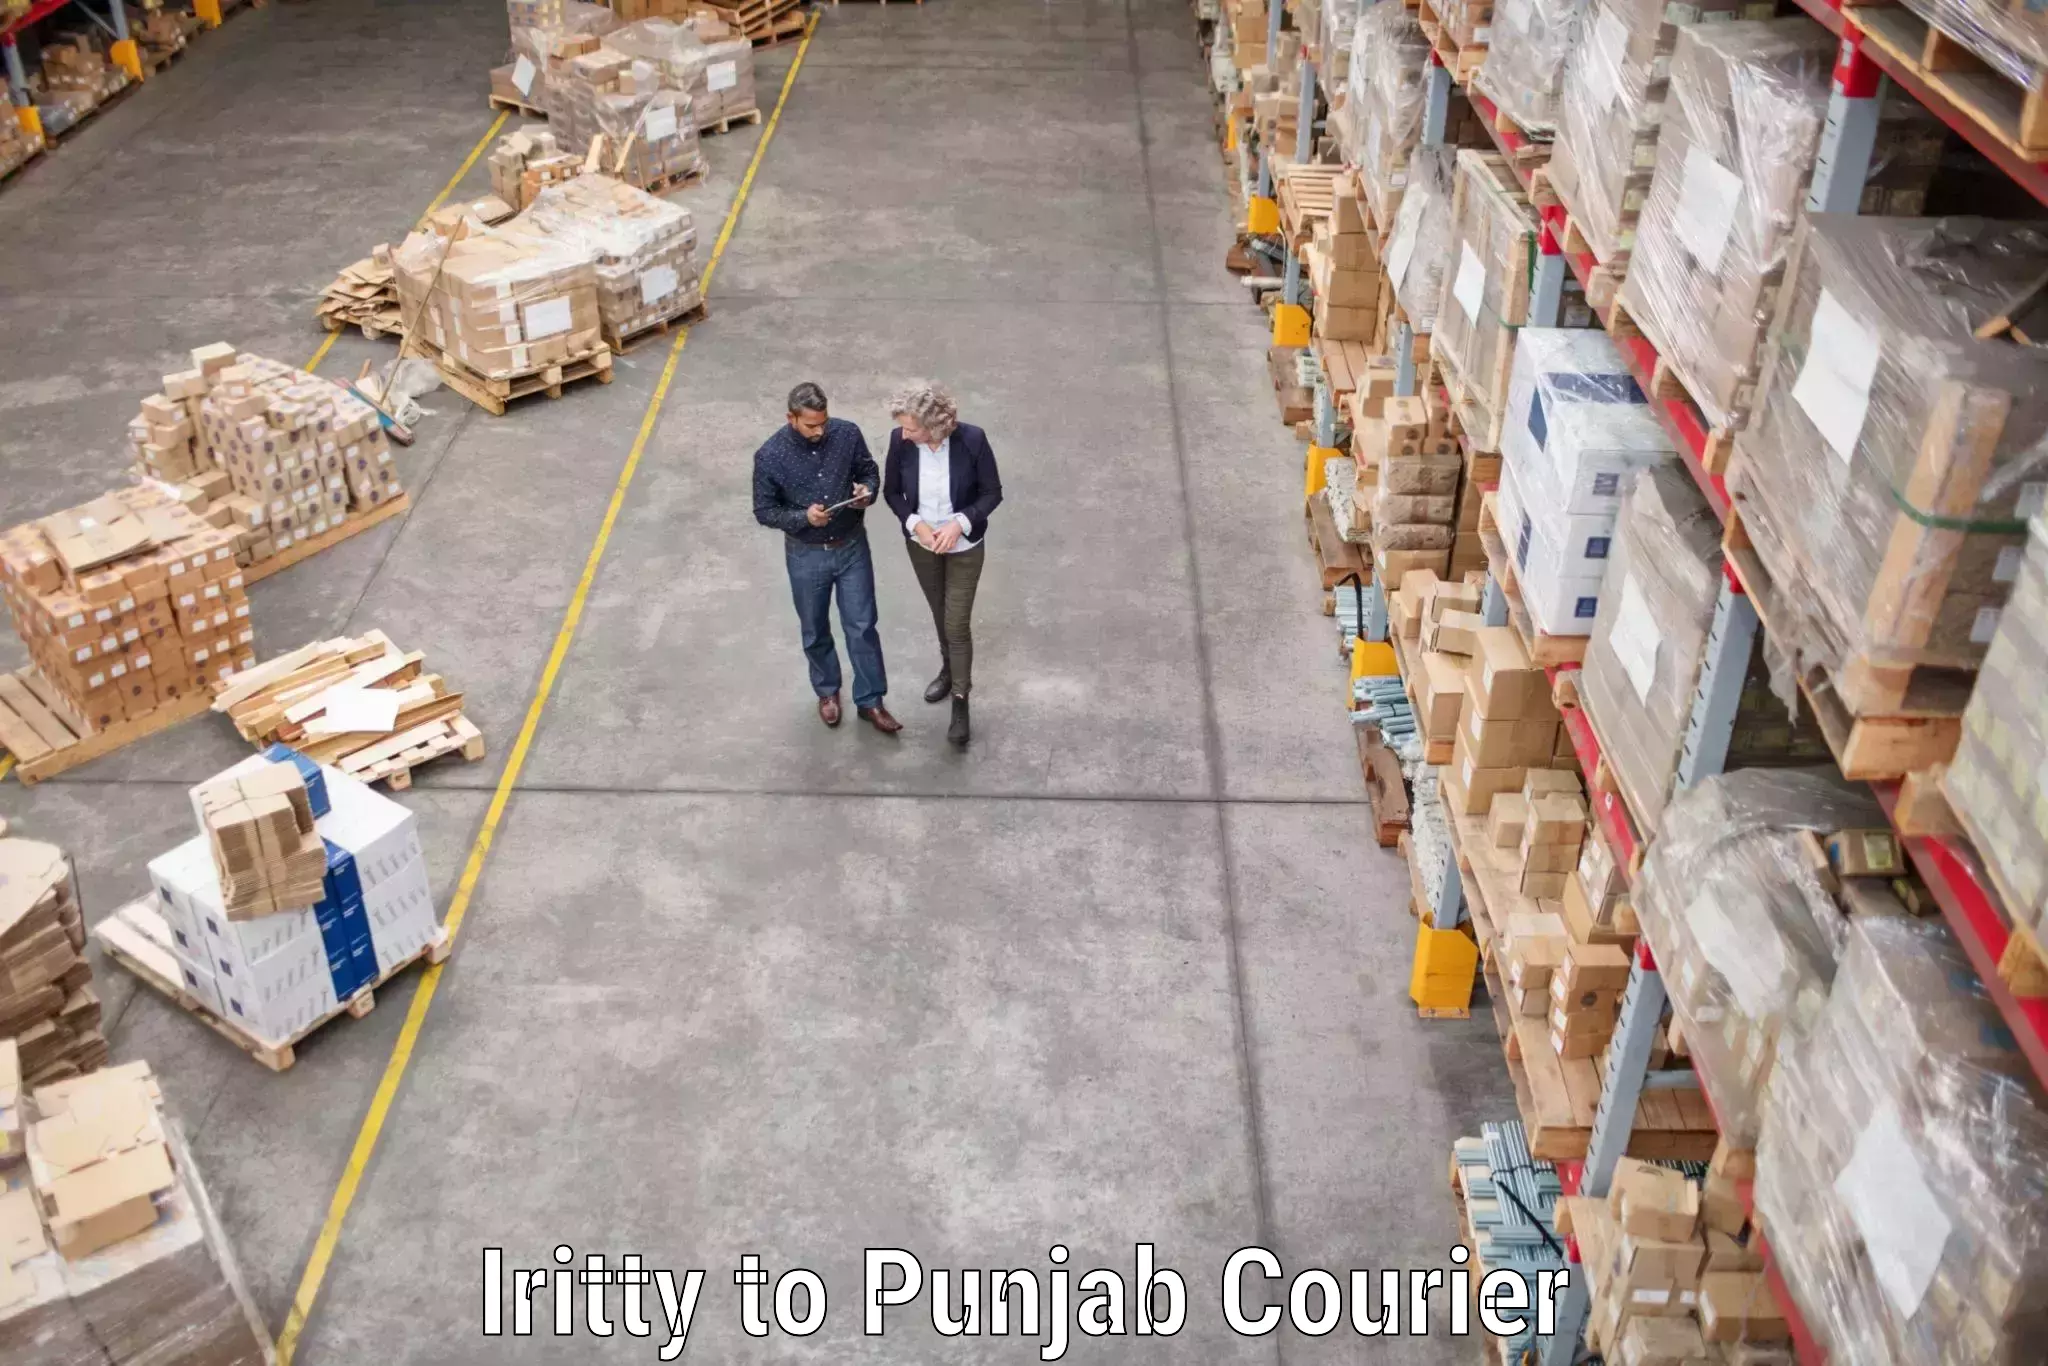 Furniture relocation services Iritty to Punjab